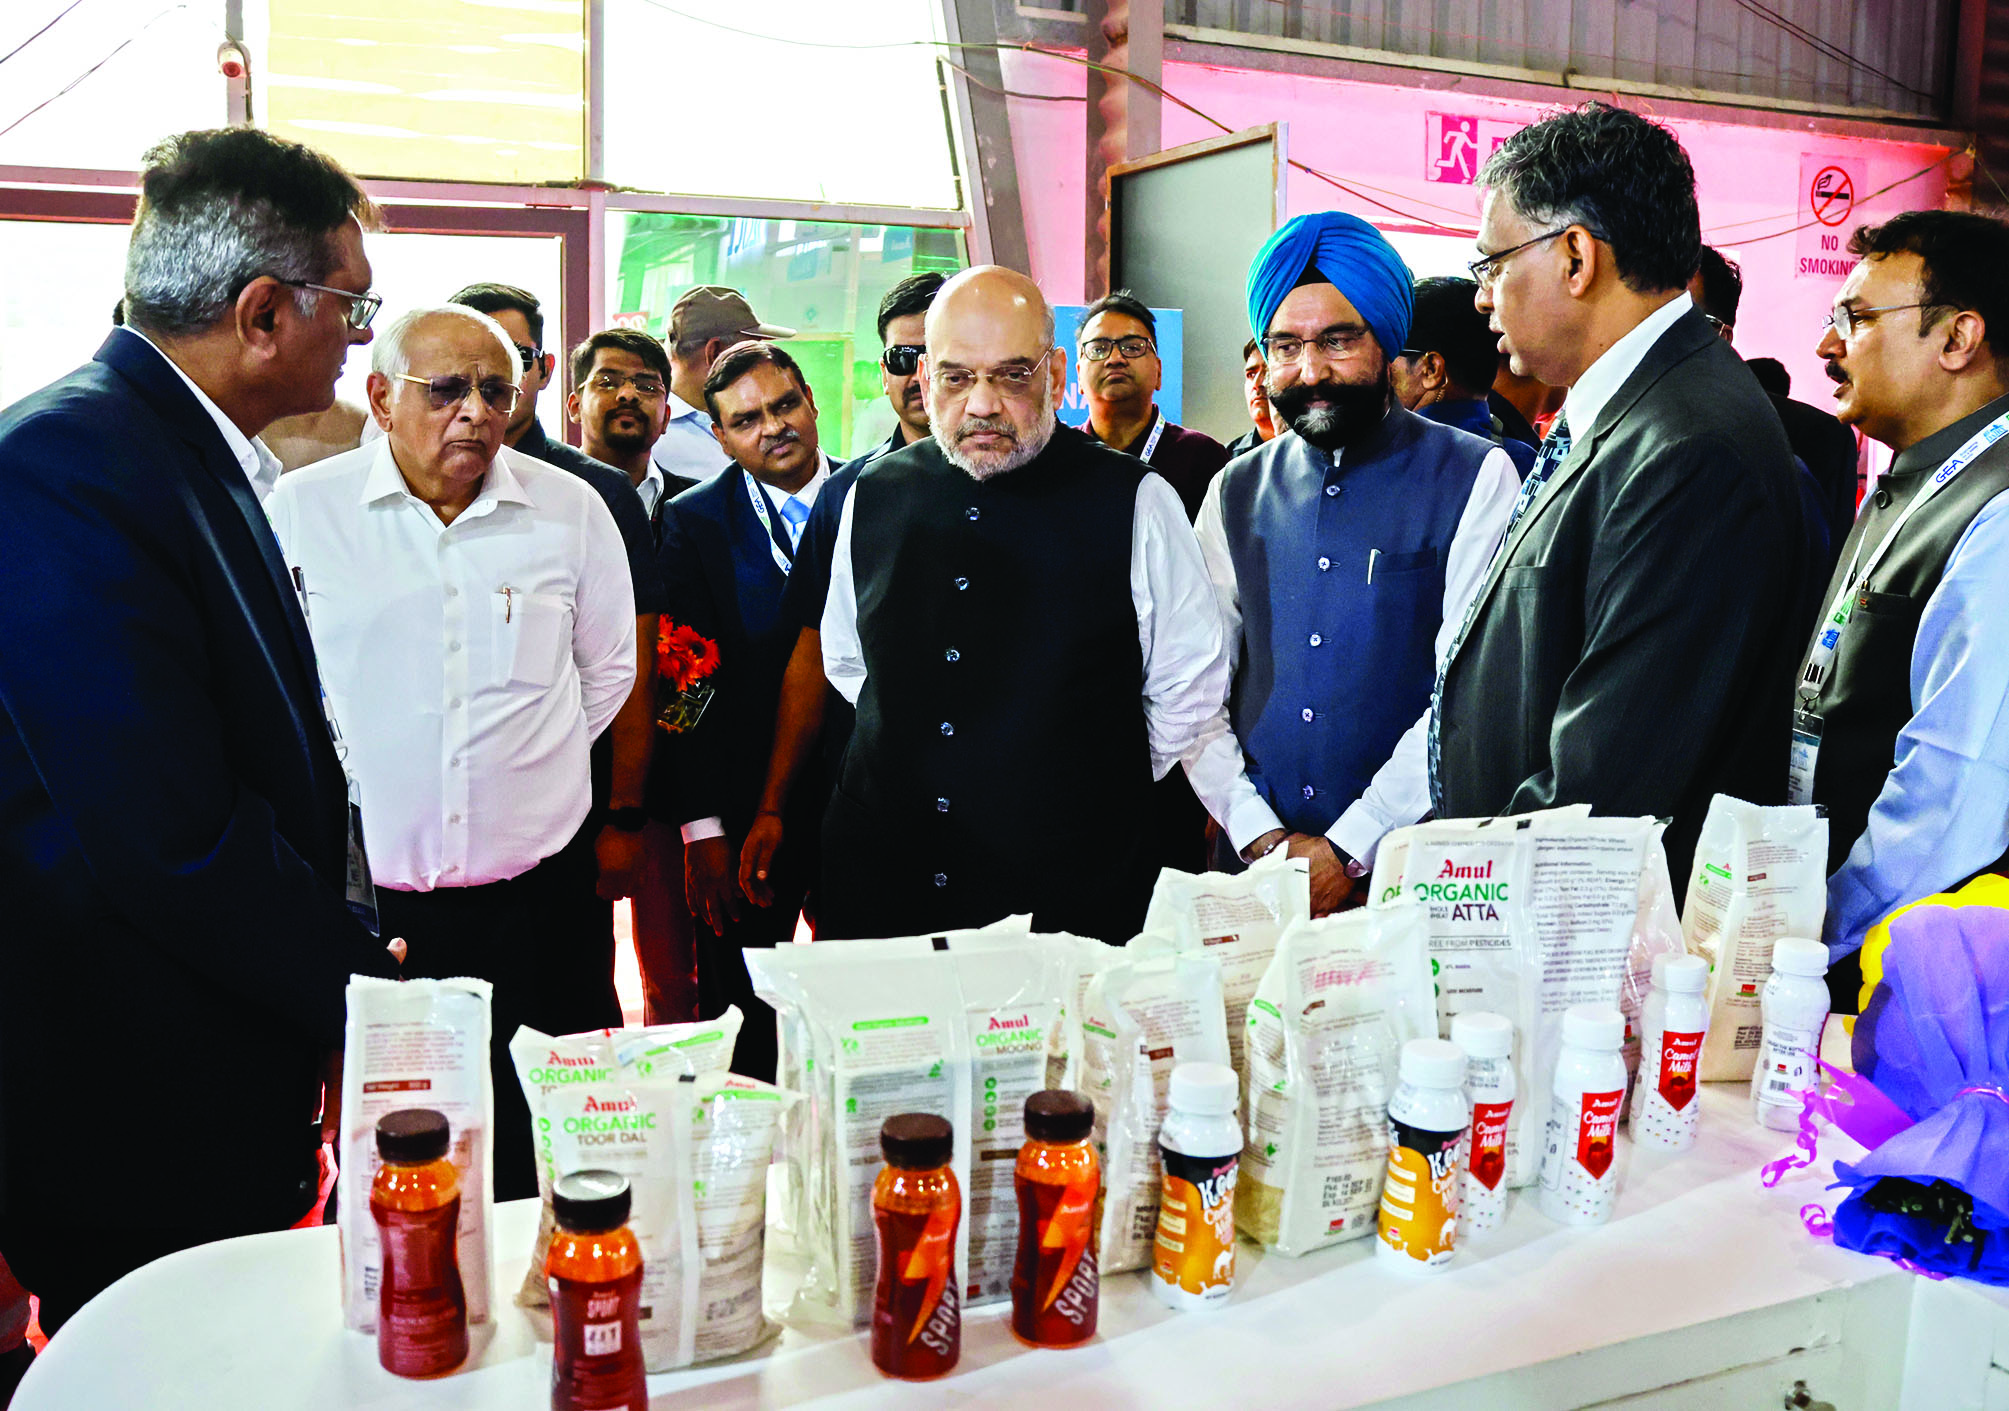 We should achieve target of 330 MMT milk production by 2033-34: Shah